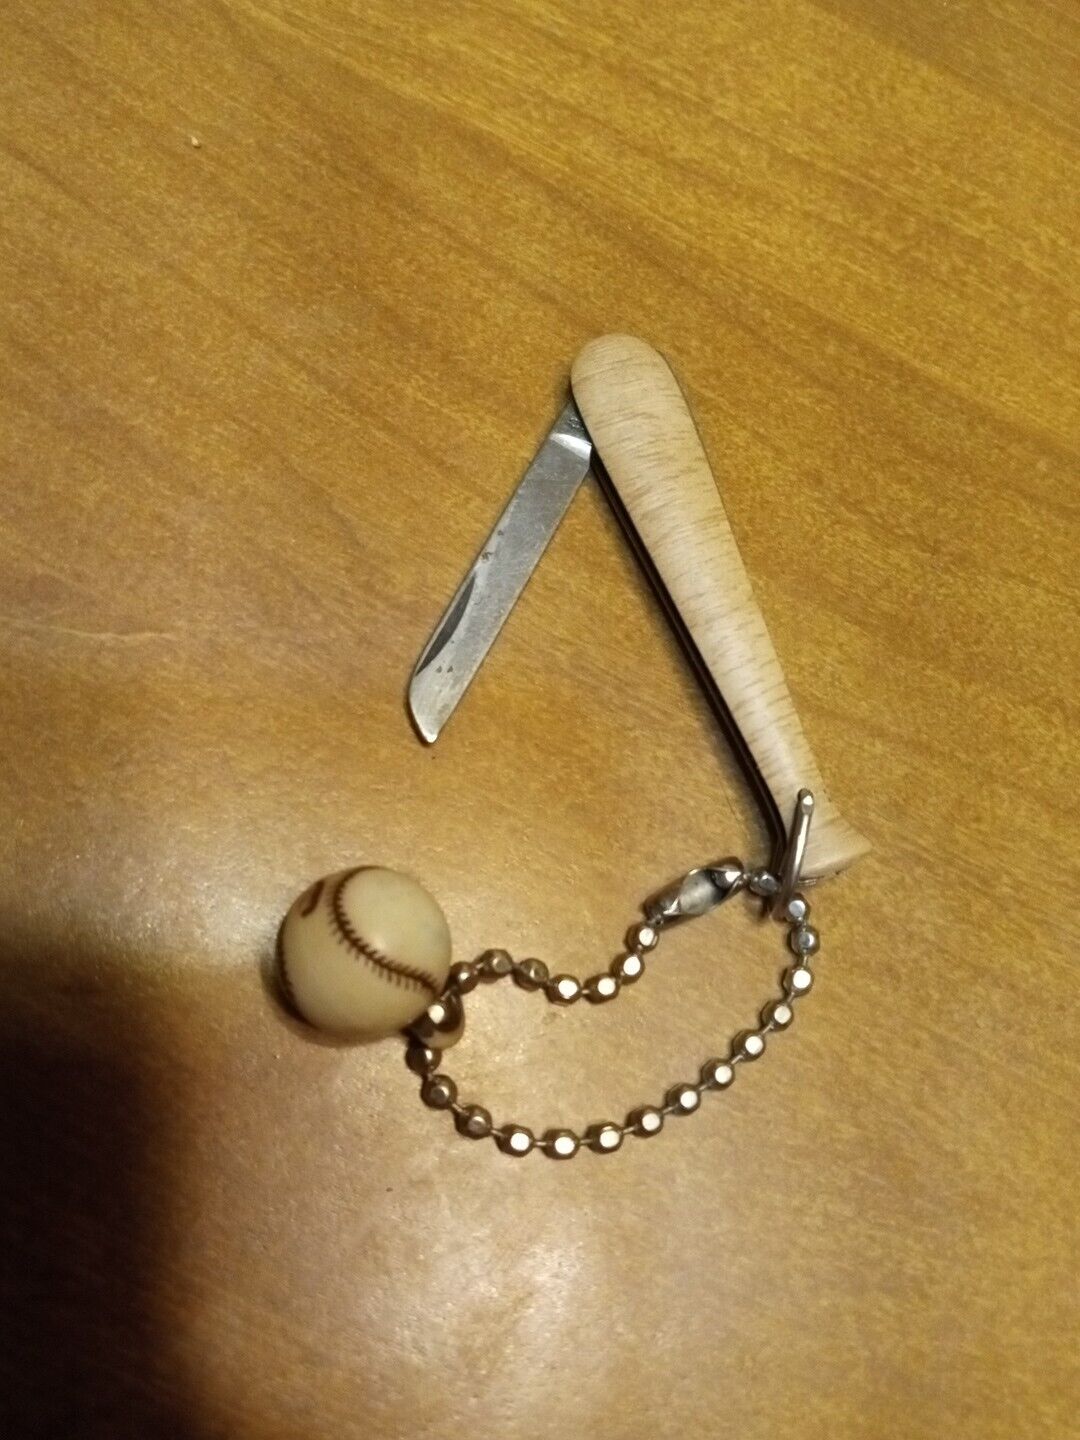 Vintage Colonial Baseball Bat Pocket Knife Keychain With Ball Very Nice Unique